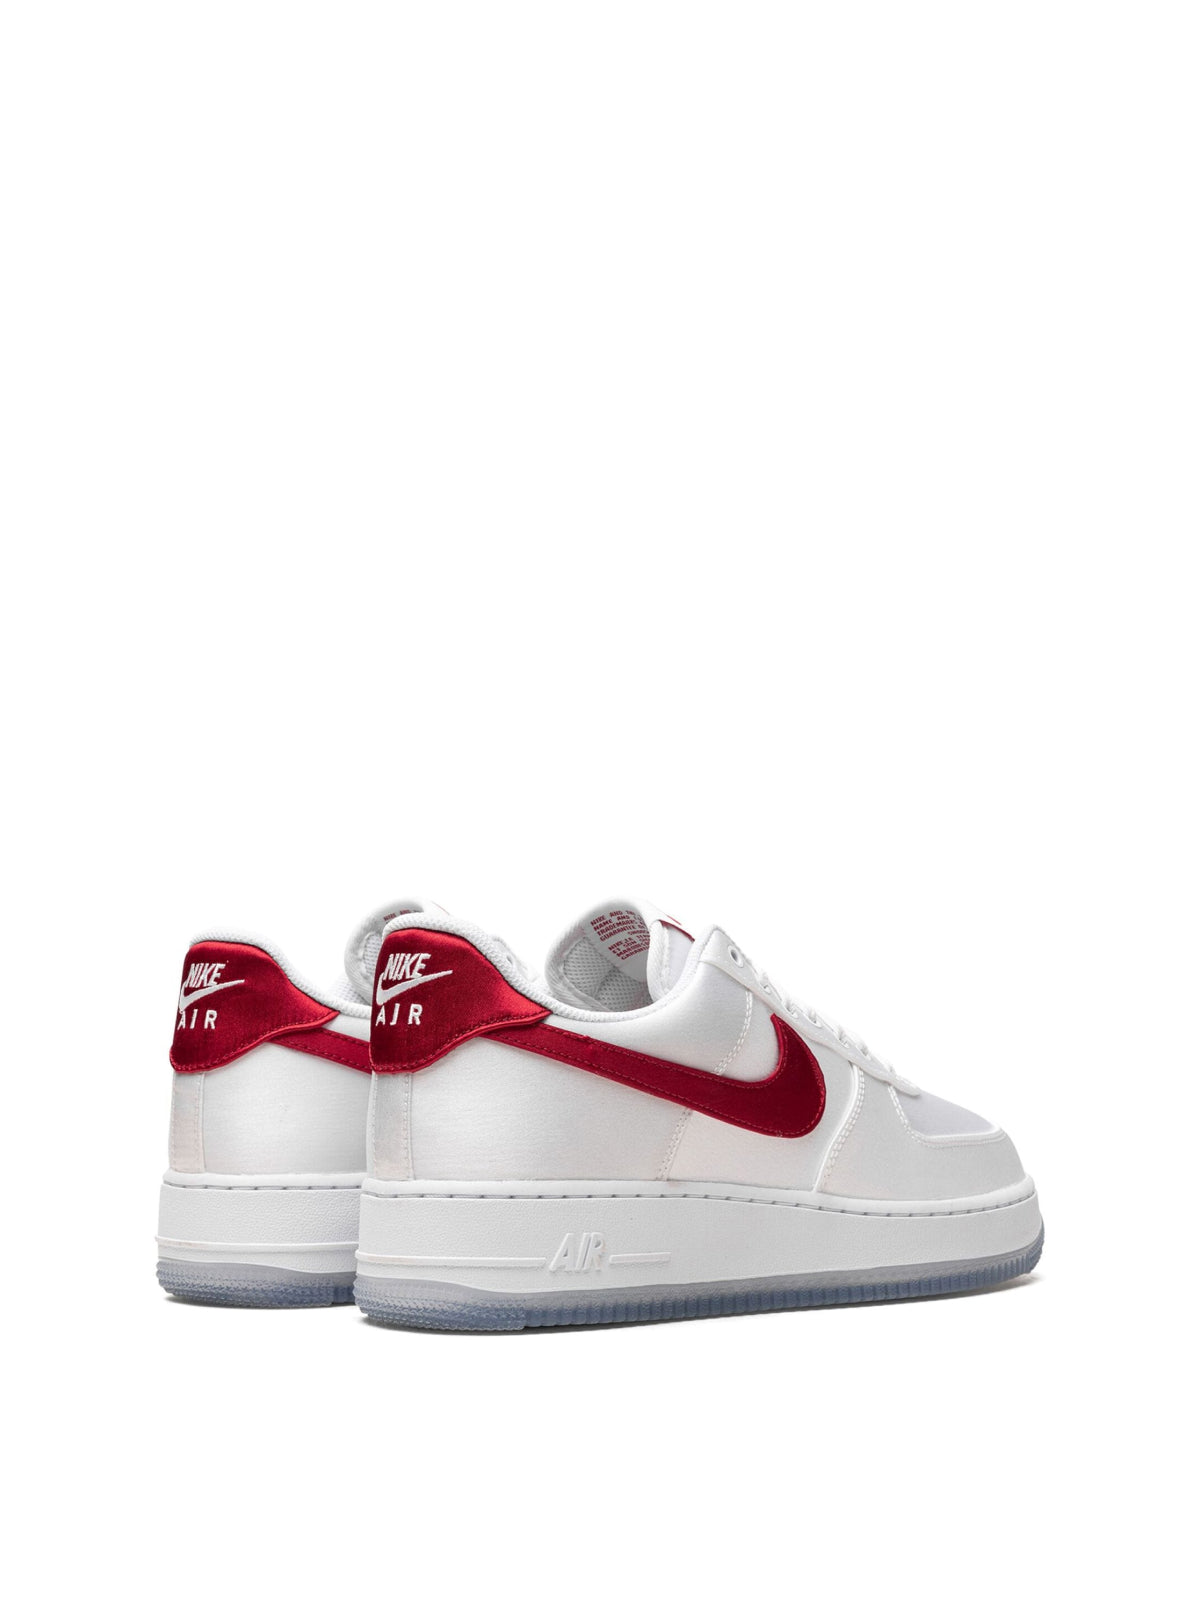 Nike-OUTLET-SALE-Air Force 1 '07 ESS SNKR Sneakers-ARCHIVIST